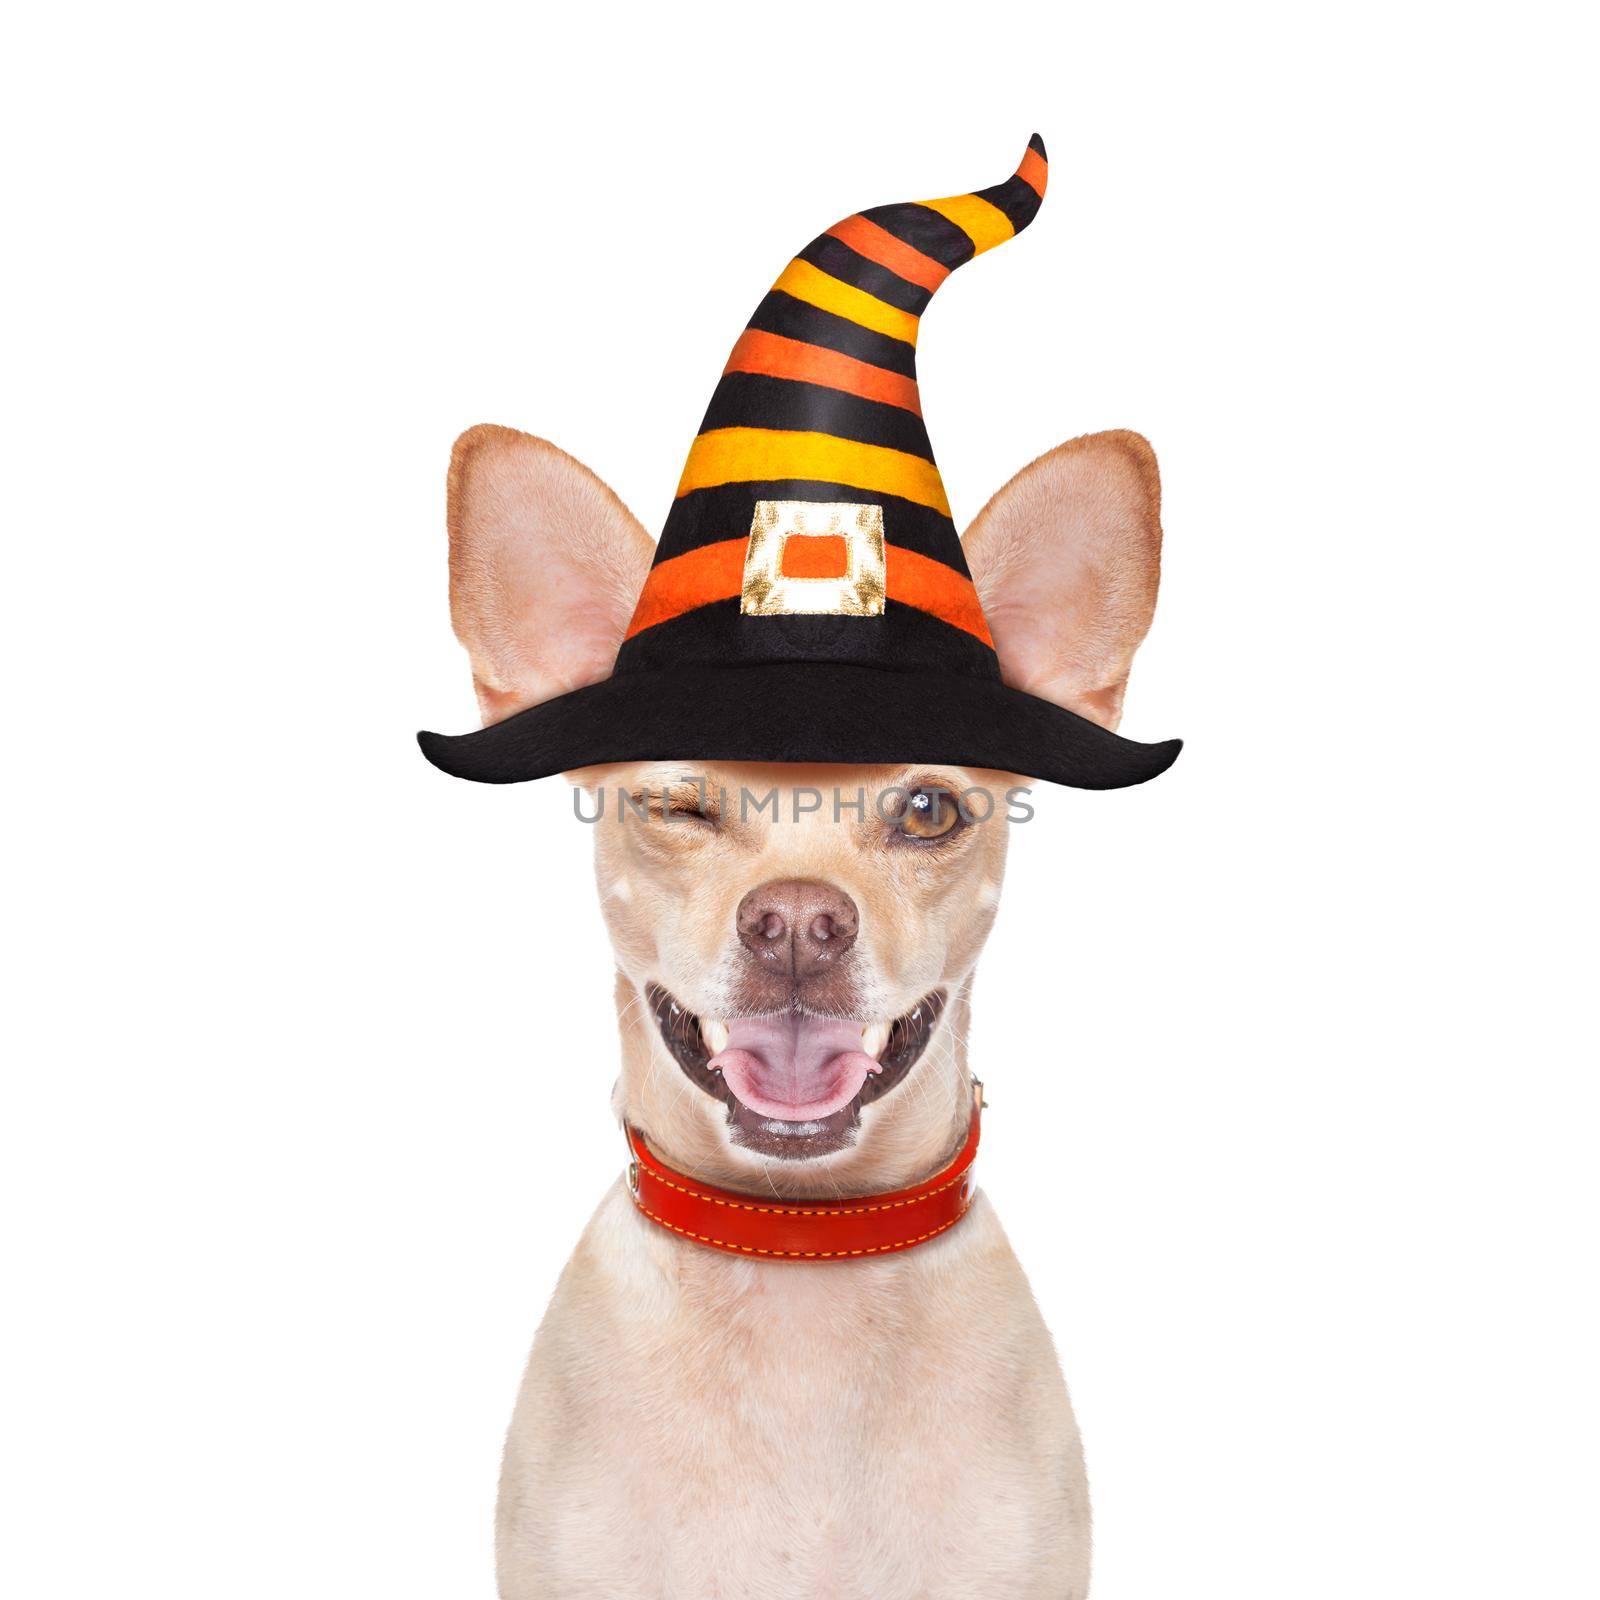 halloween devil,chihuahua dog scared and frightened, isolated on white background, wearing a witch hat, behind white blank banner or placard poster